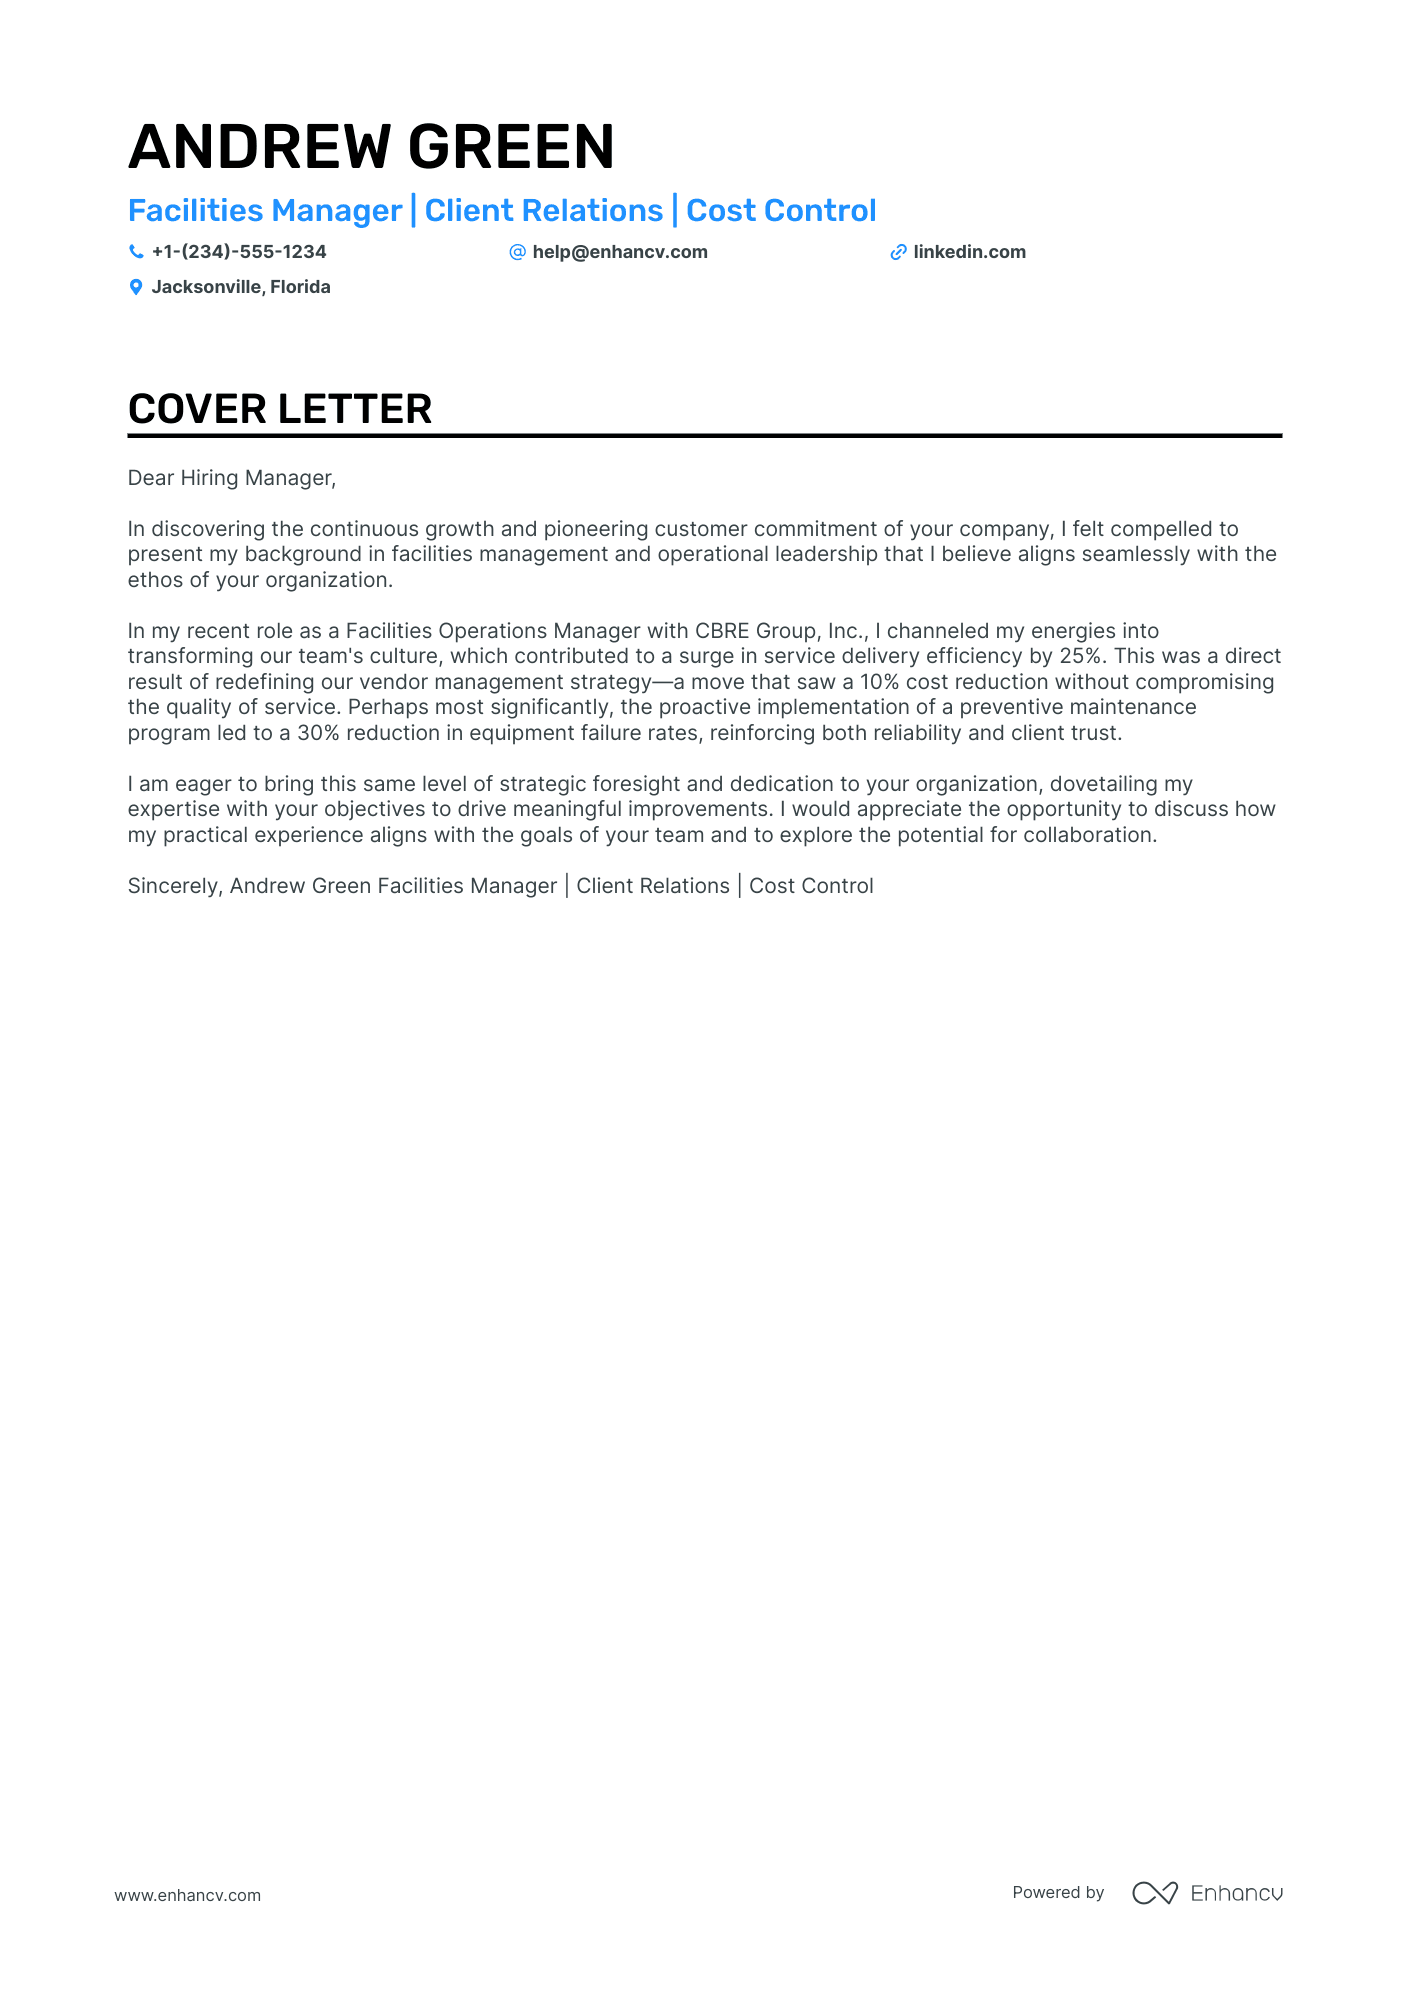 Facilities Manager cover letter